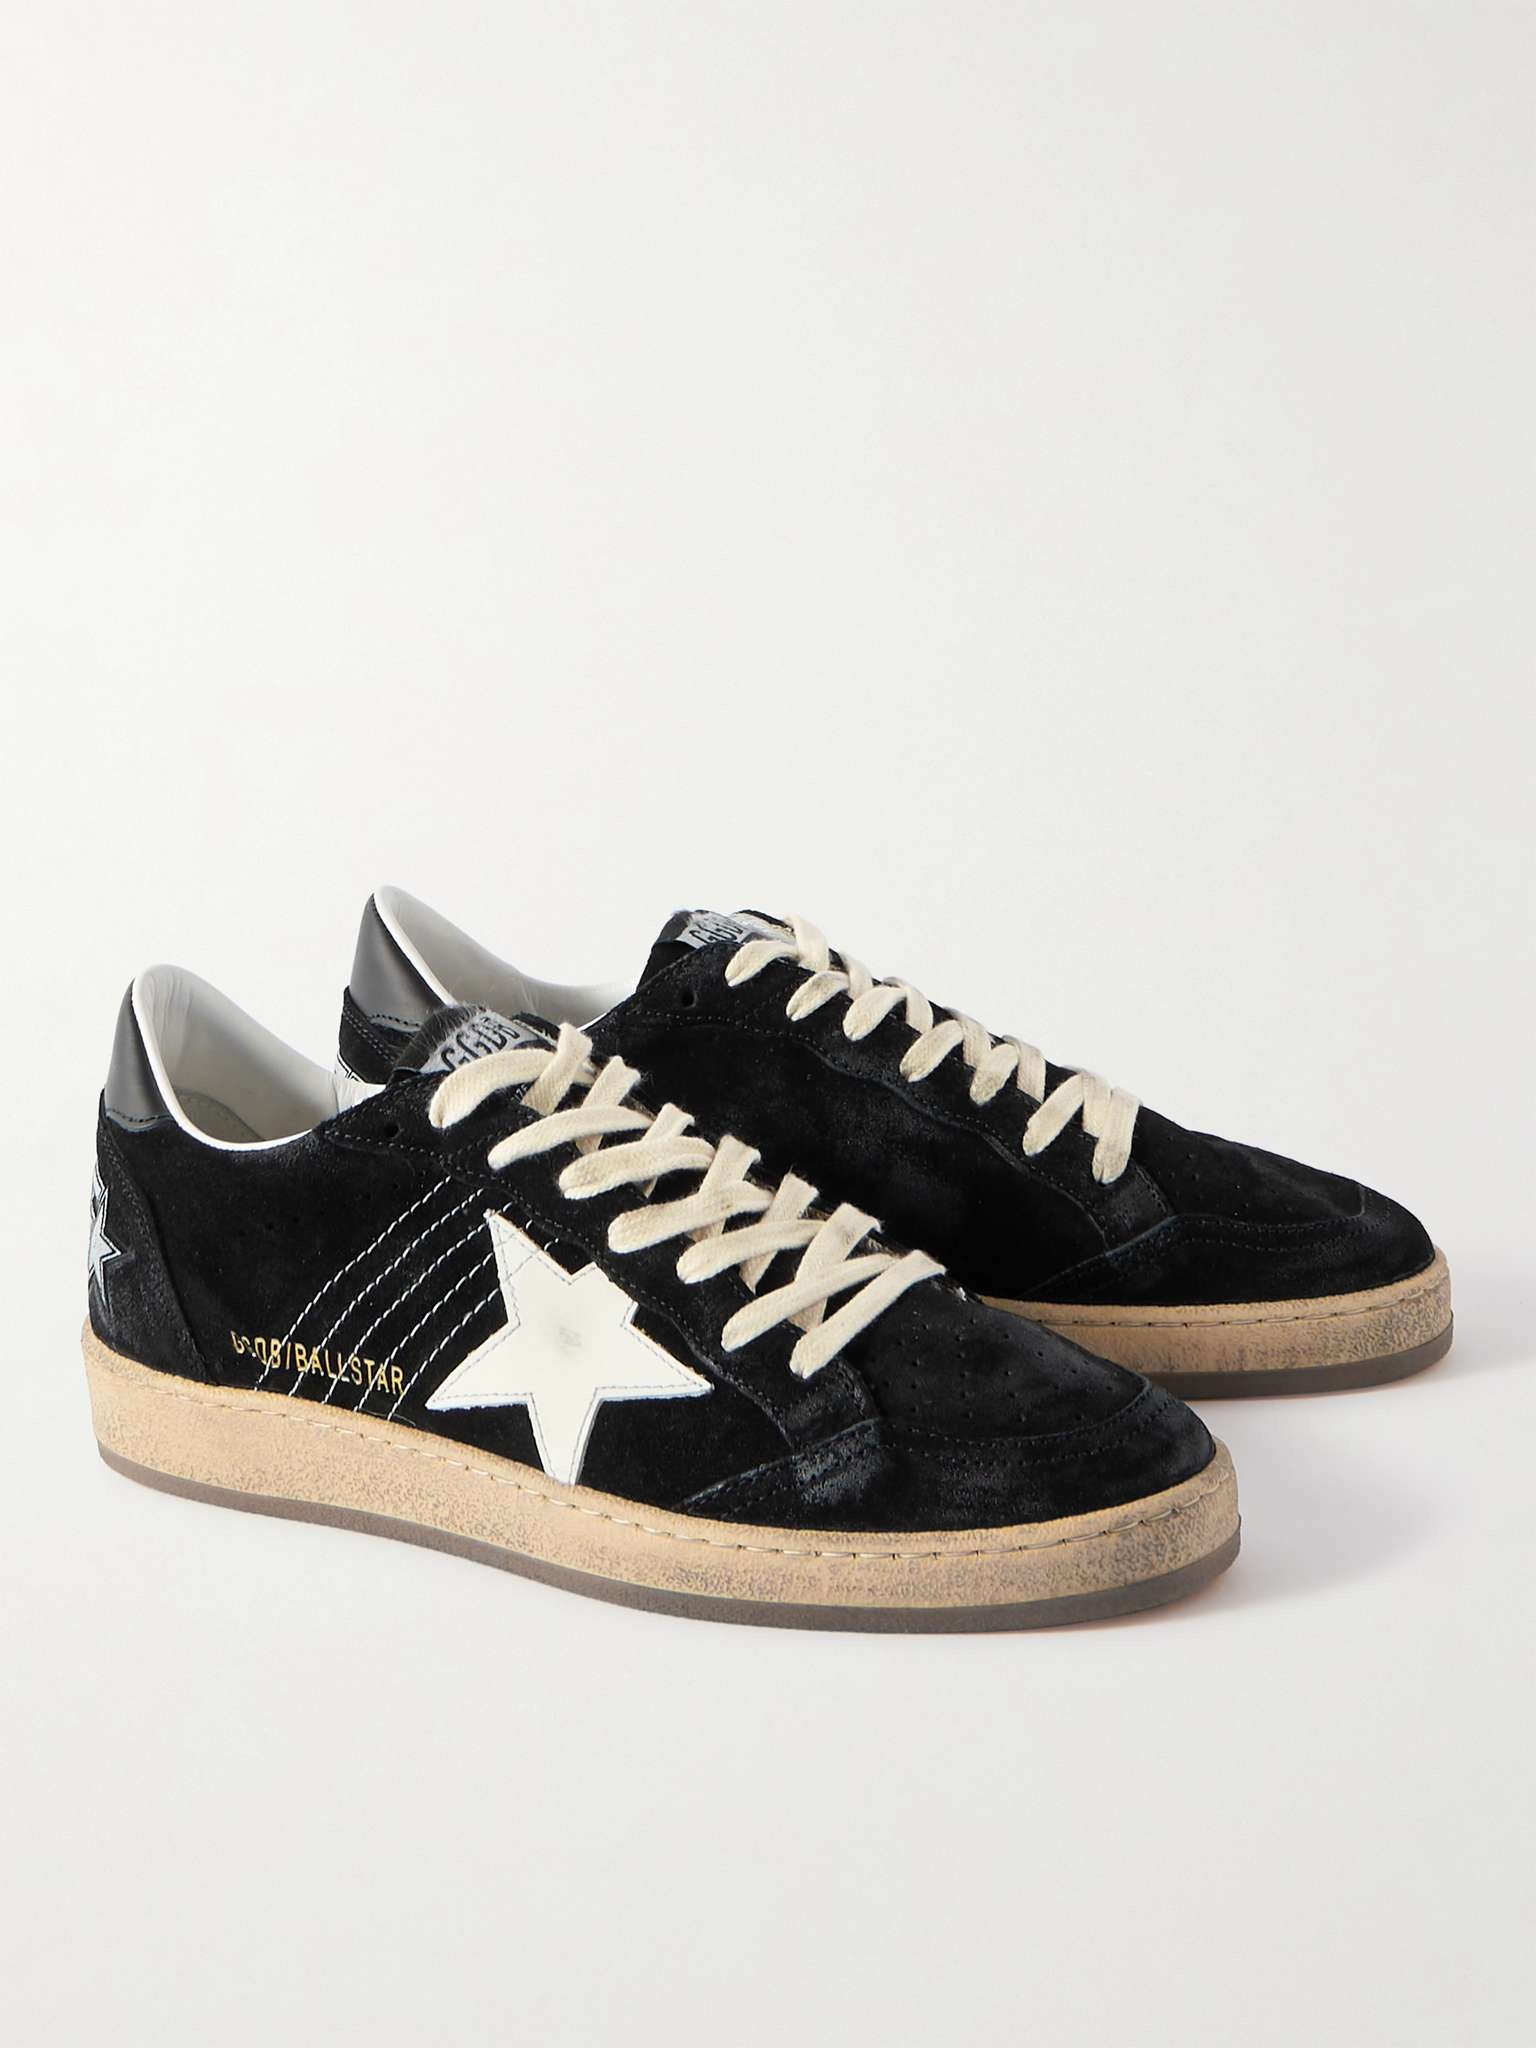 Ball Star Distressed Suede and Leather Sneakers - 4